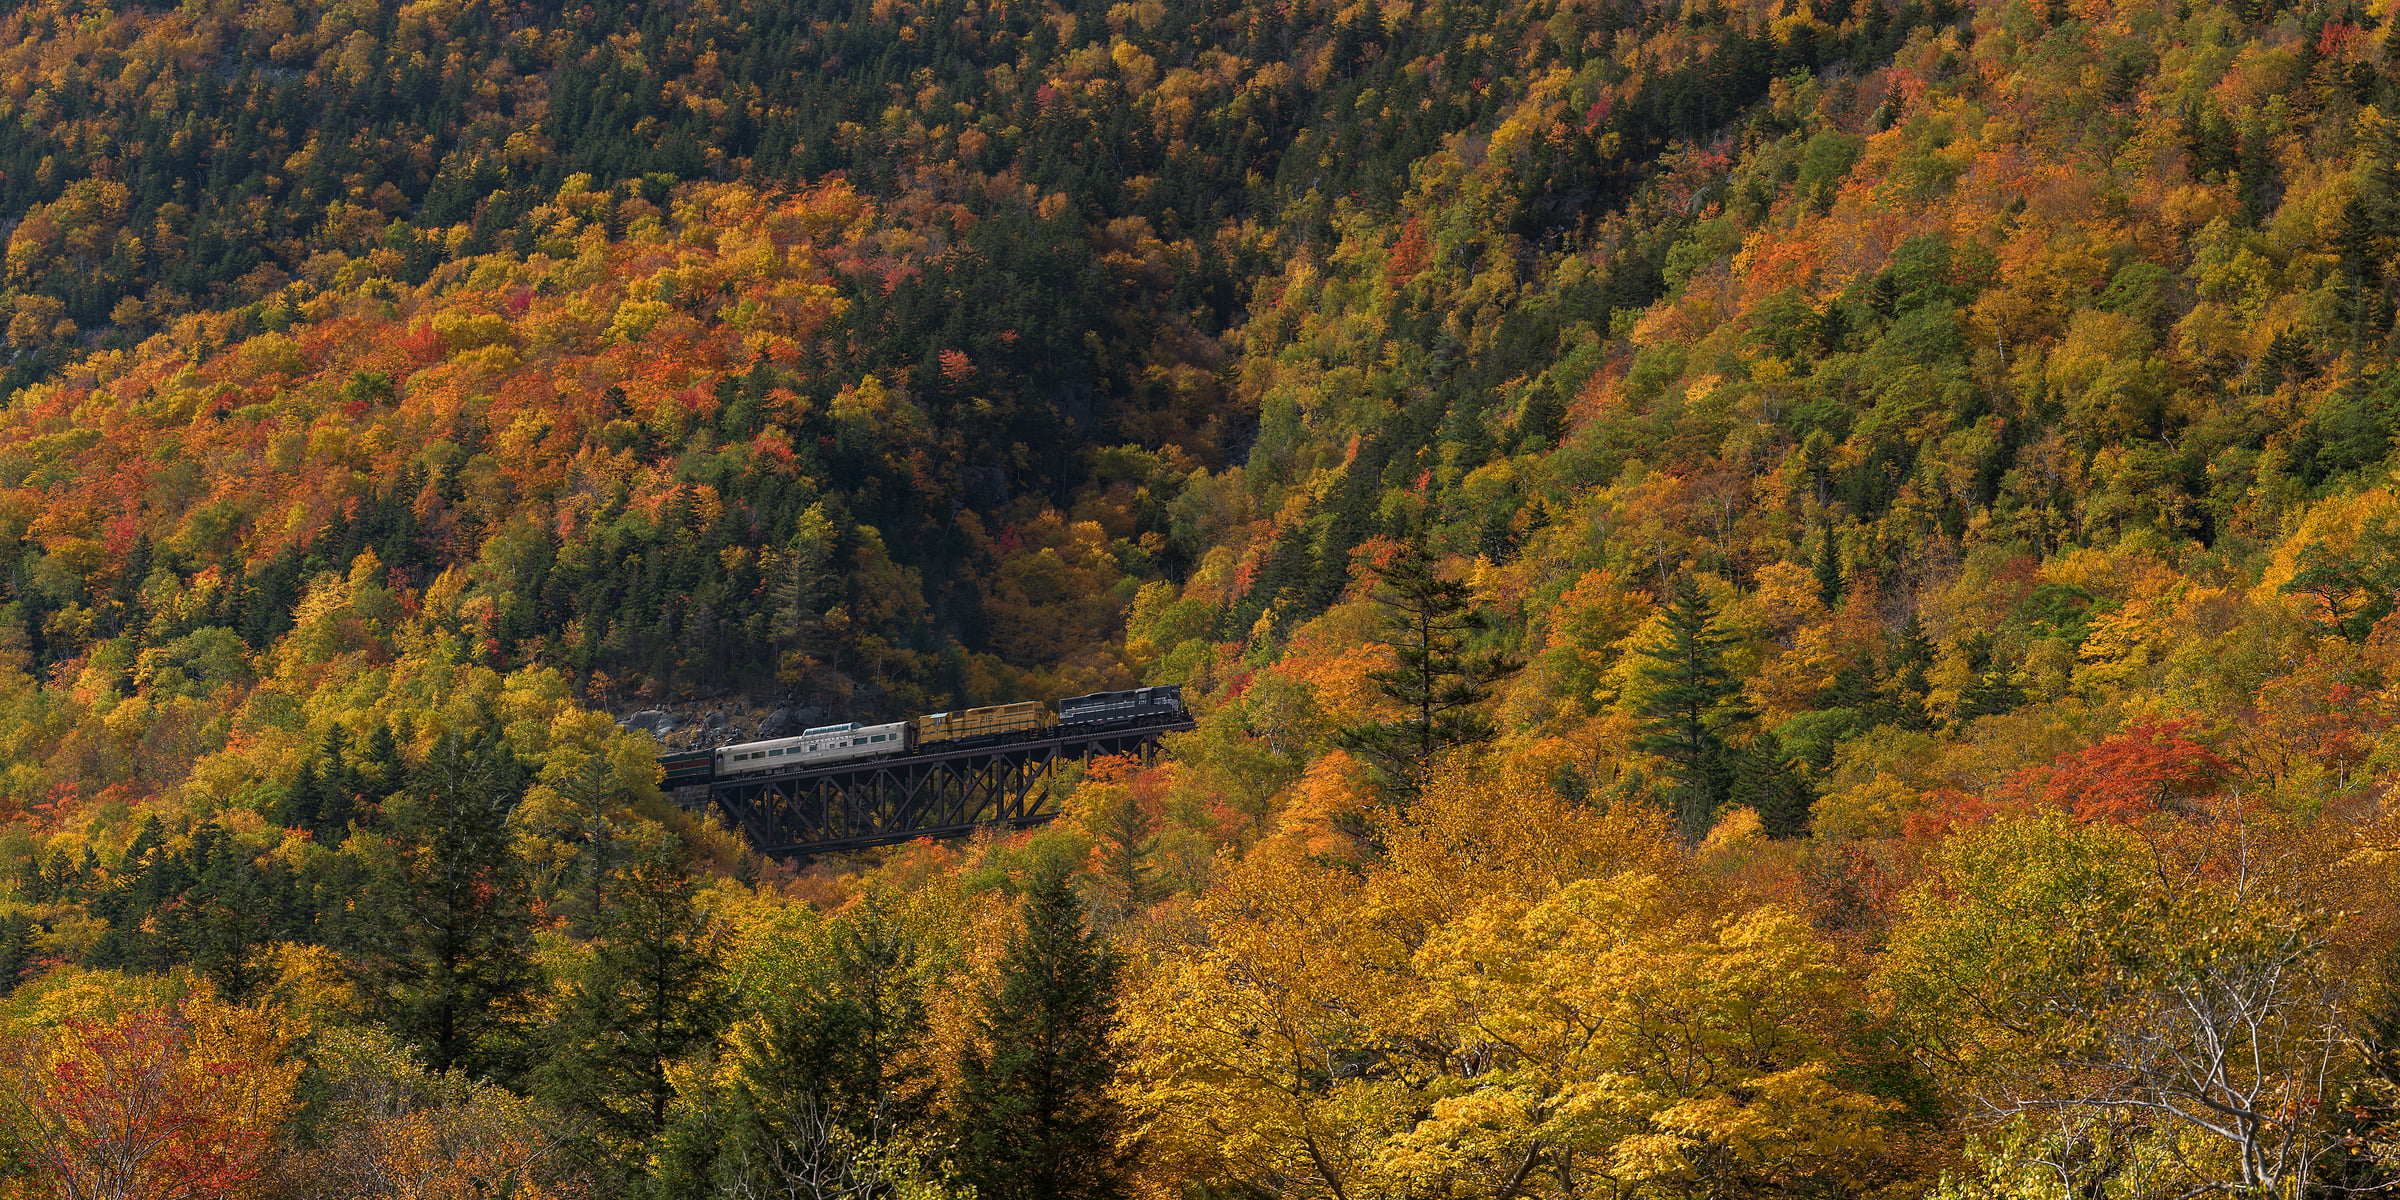 301 megapixels! A very high resolution, large-format VAST photo print of a train going over a trestle bridge amid autumn foliage on a mountain; fine art photograph created by Aaron Priest in Hart's Location, New Hampshire.